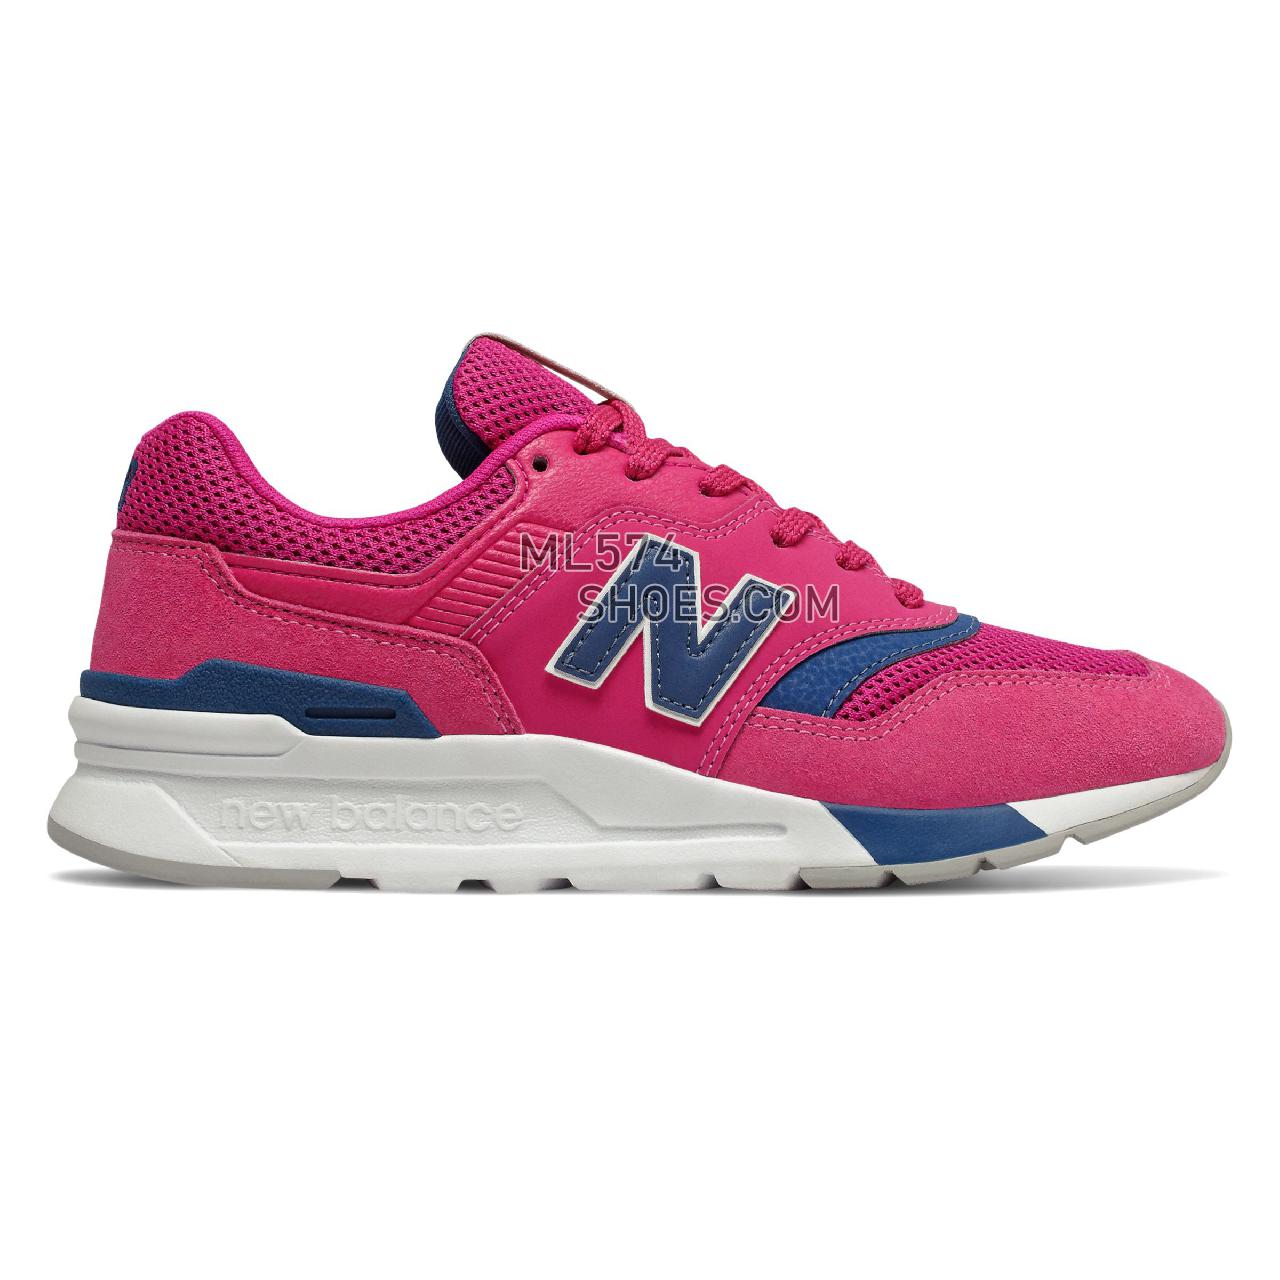 New Balance 997H - Women's Classic Sneakers - Pink with Blue - CW997HNZ